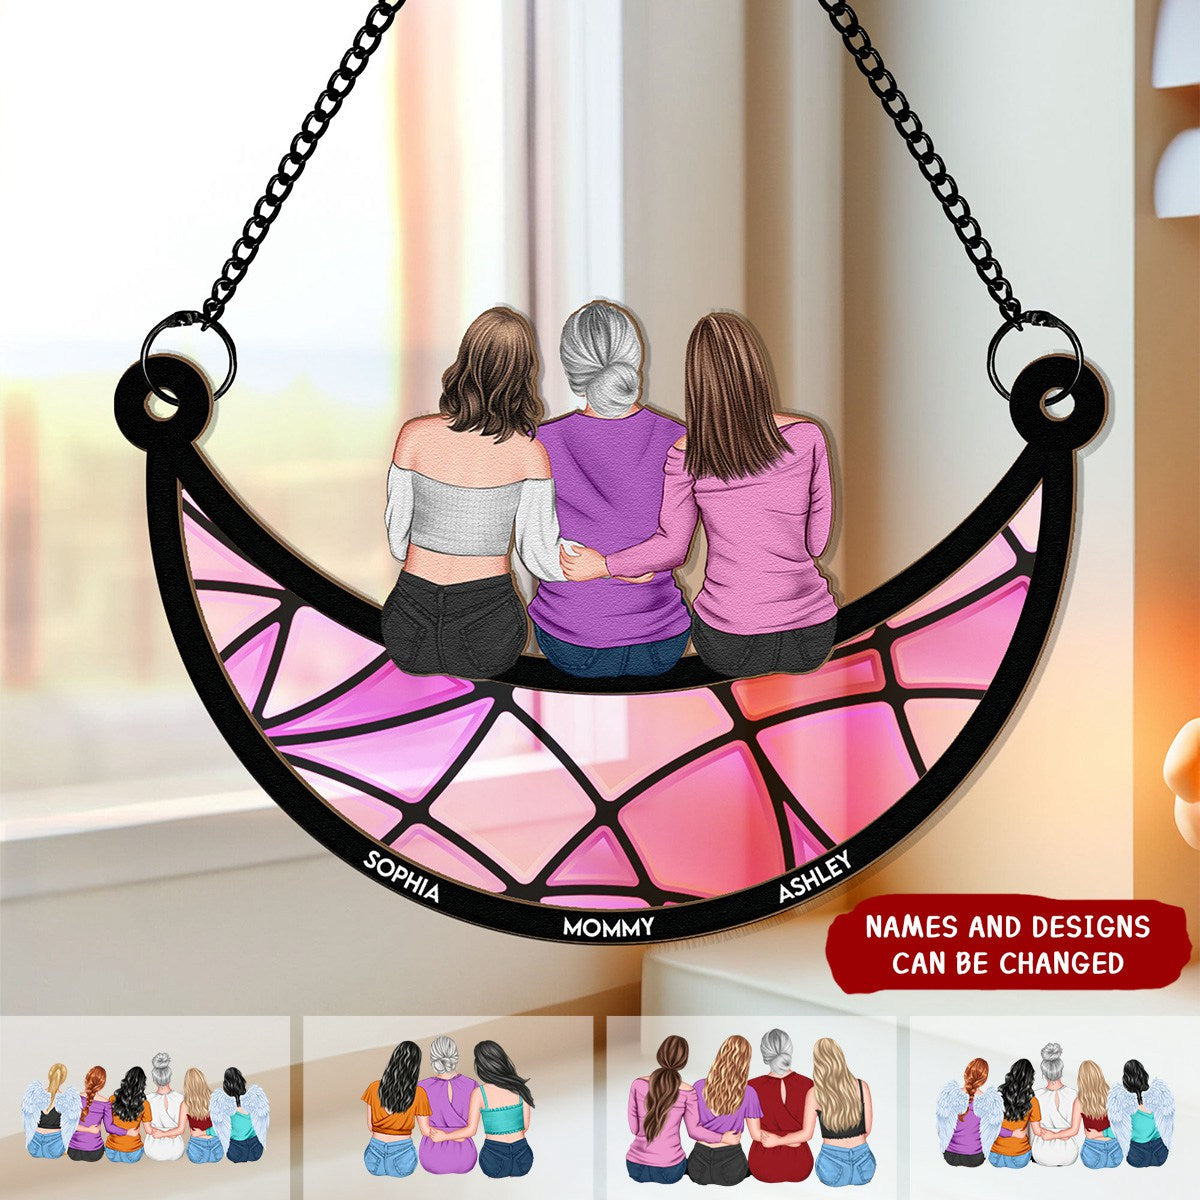 Mother & Daughter On The Moon - Personalized Window Hanging Suncatcher Ornament